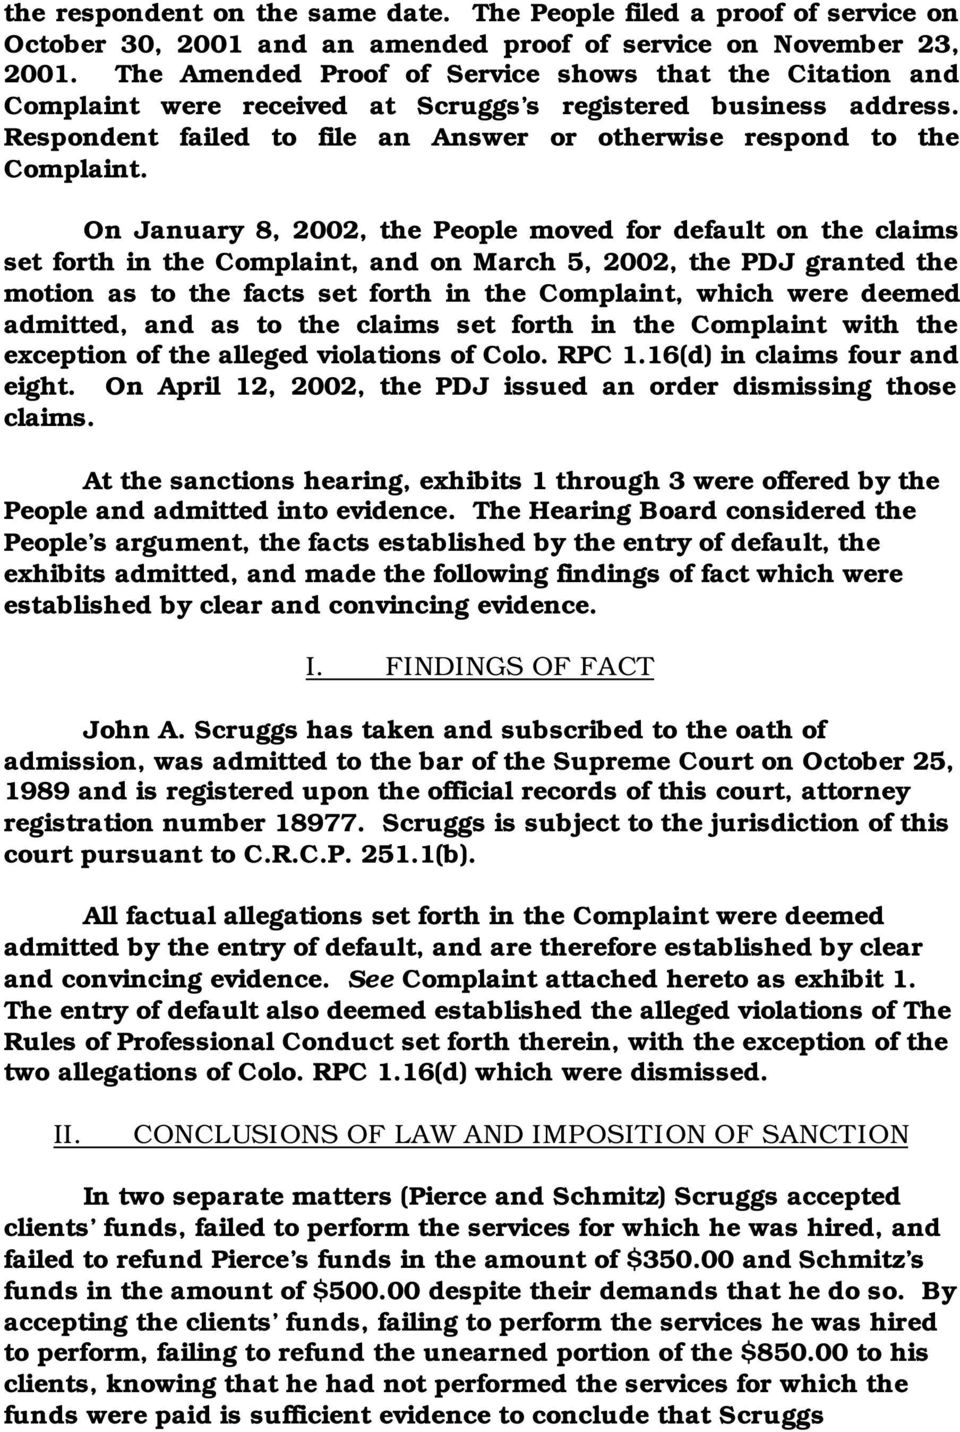 On January 8, 2002, the People moved for default on the claims set forth in the Complaint, and on March 5, 2002, the PDJ granted the motion as to the facts set forth in the Complaint, which were